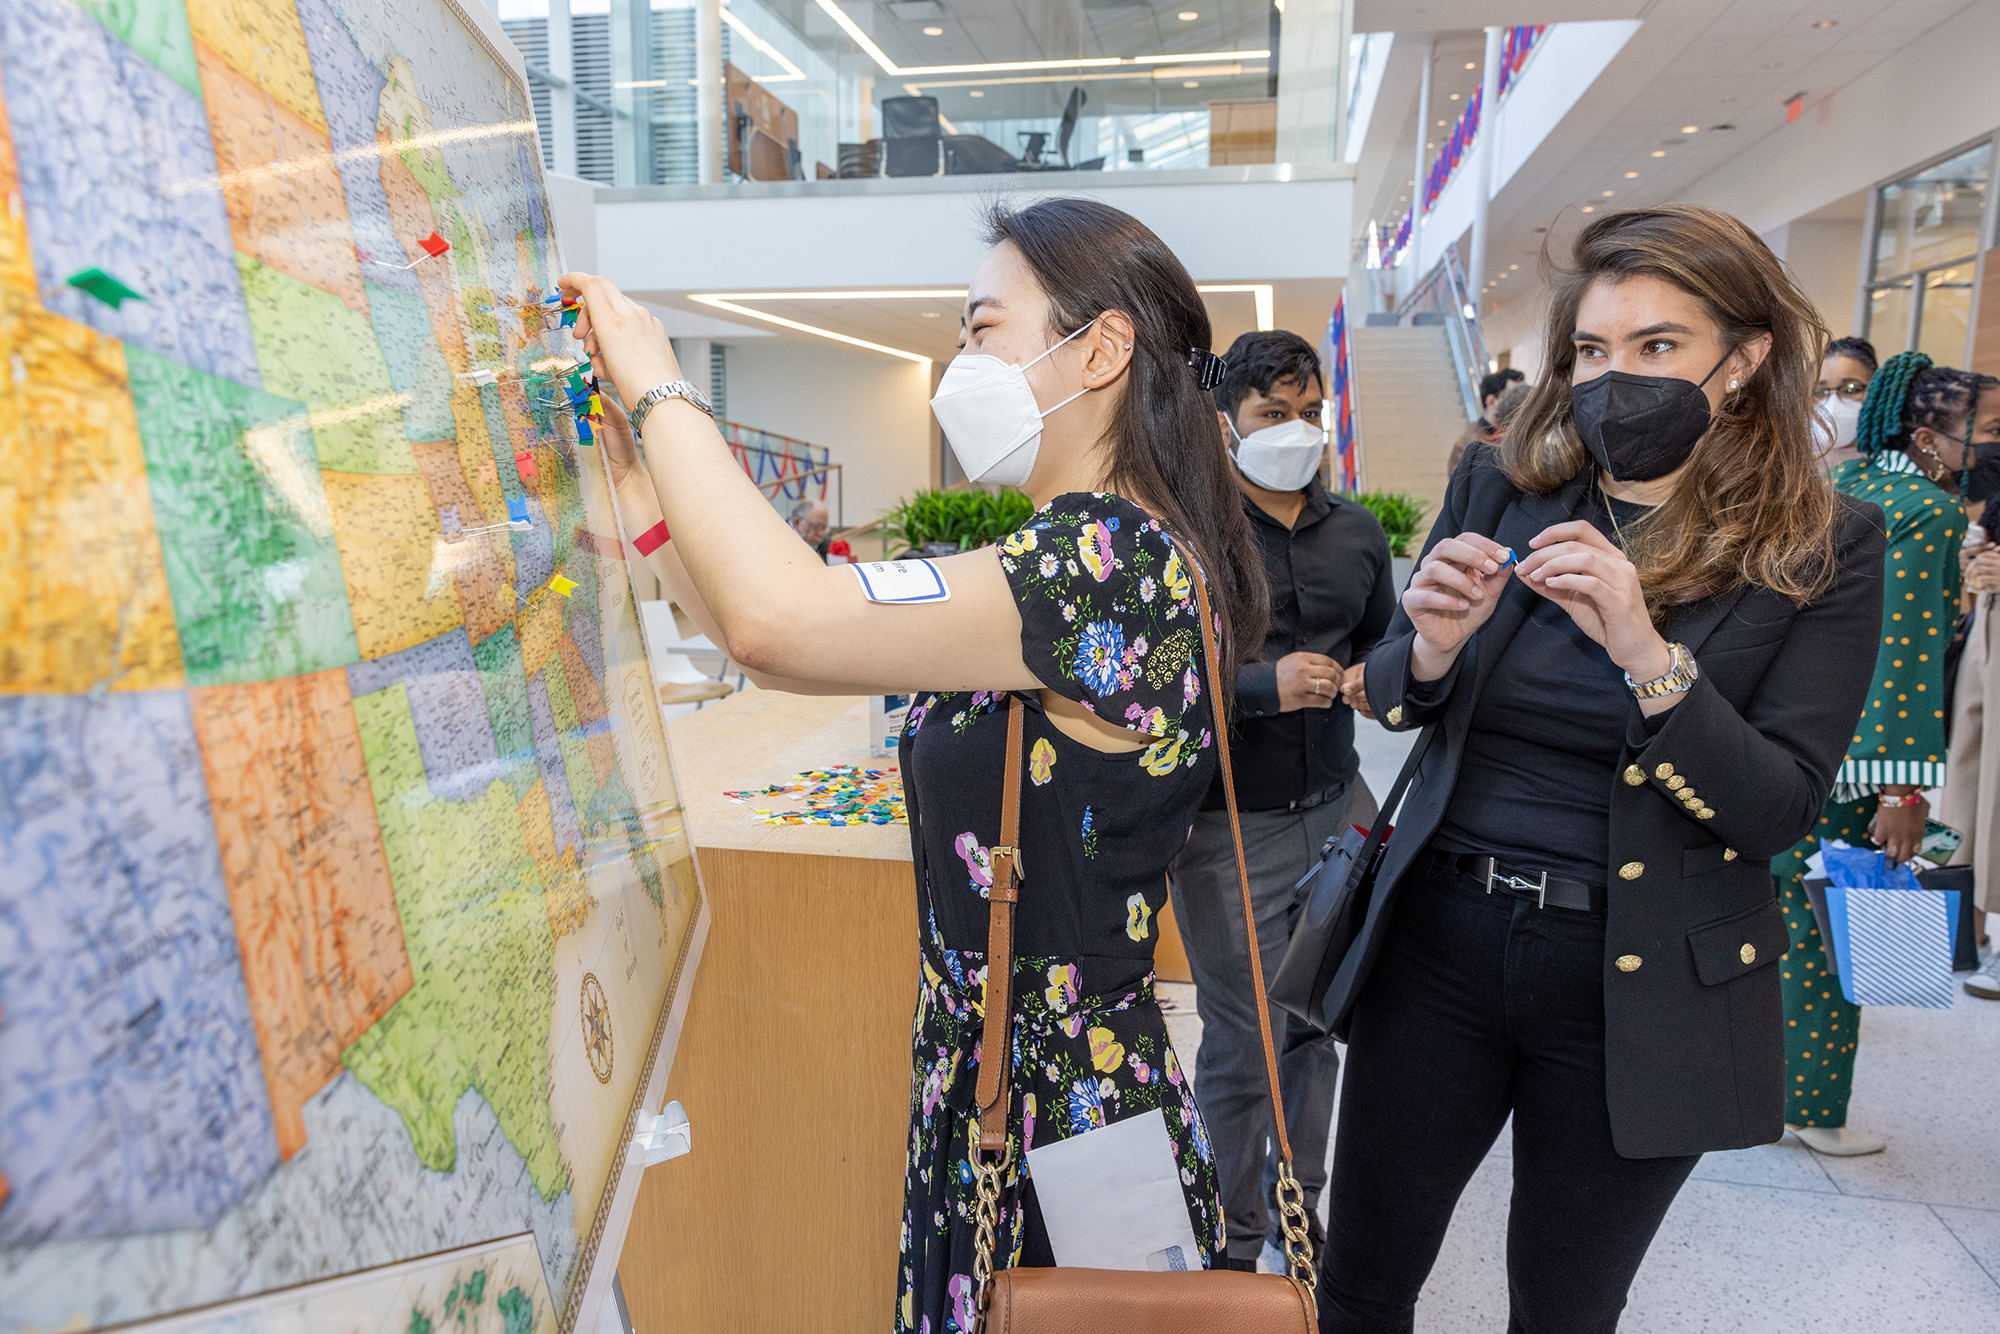 A Penn Med student puts a pin in a large map displayed for Match Day.